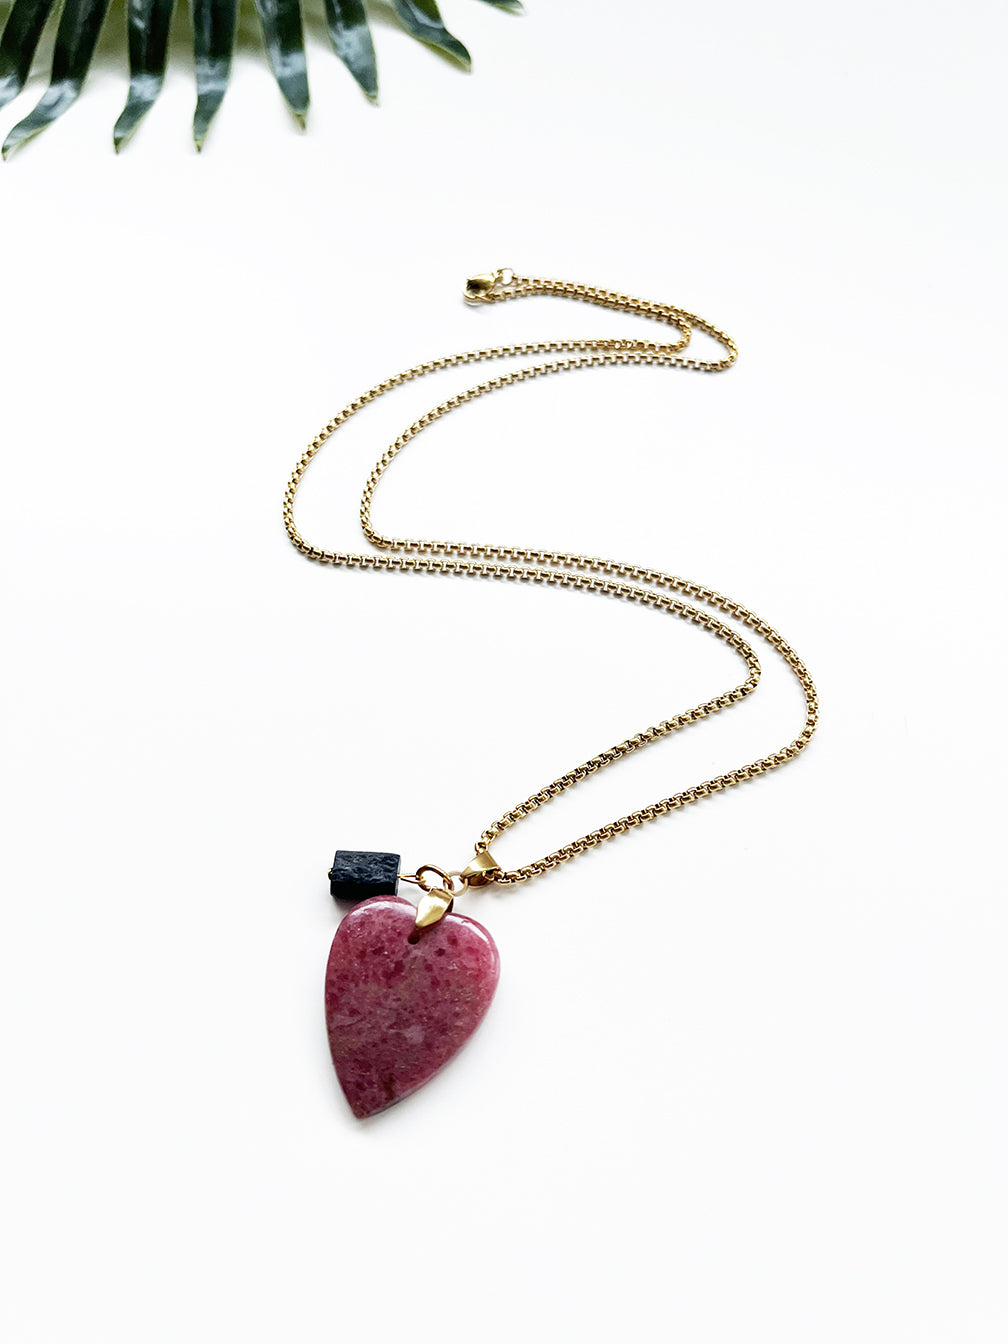 touchstone necklace - rhodonite and black tourmaline